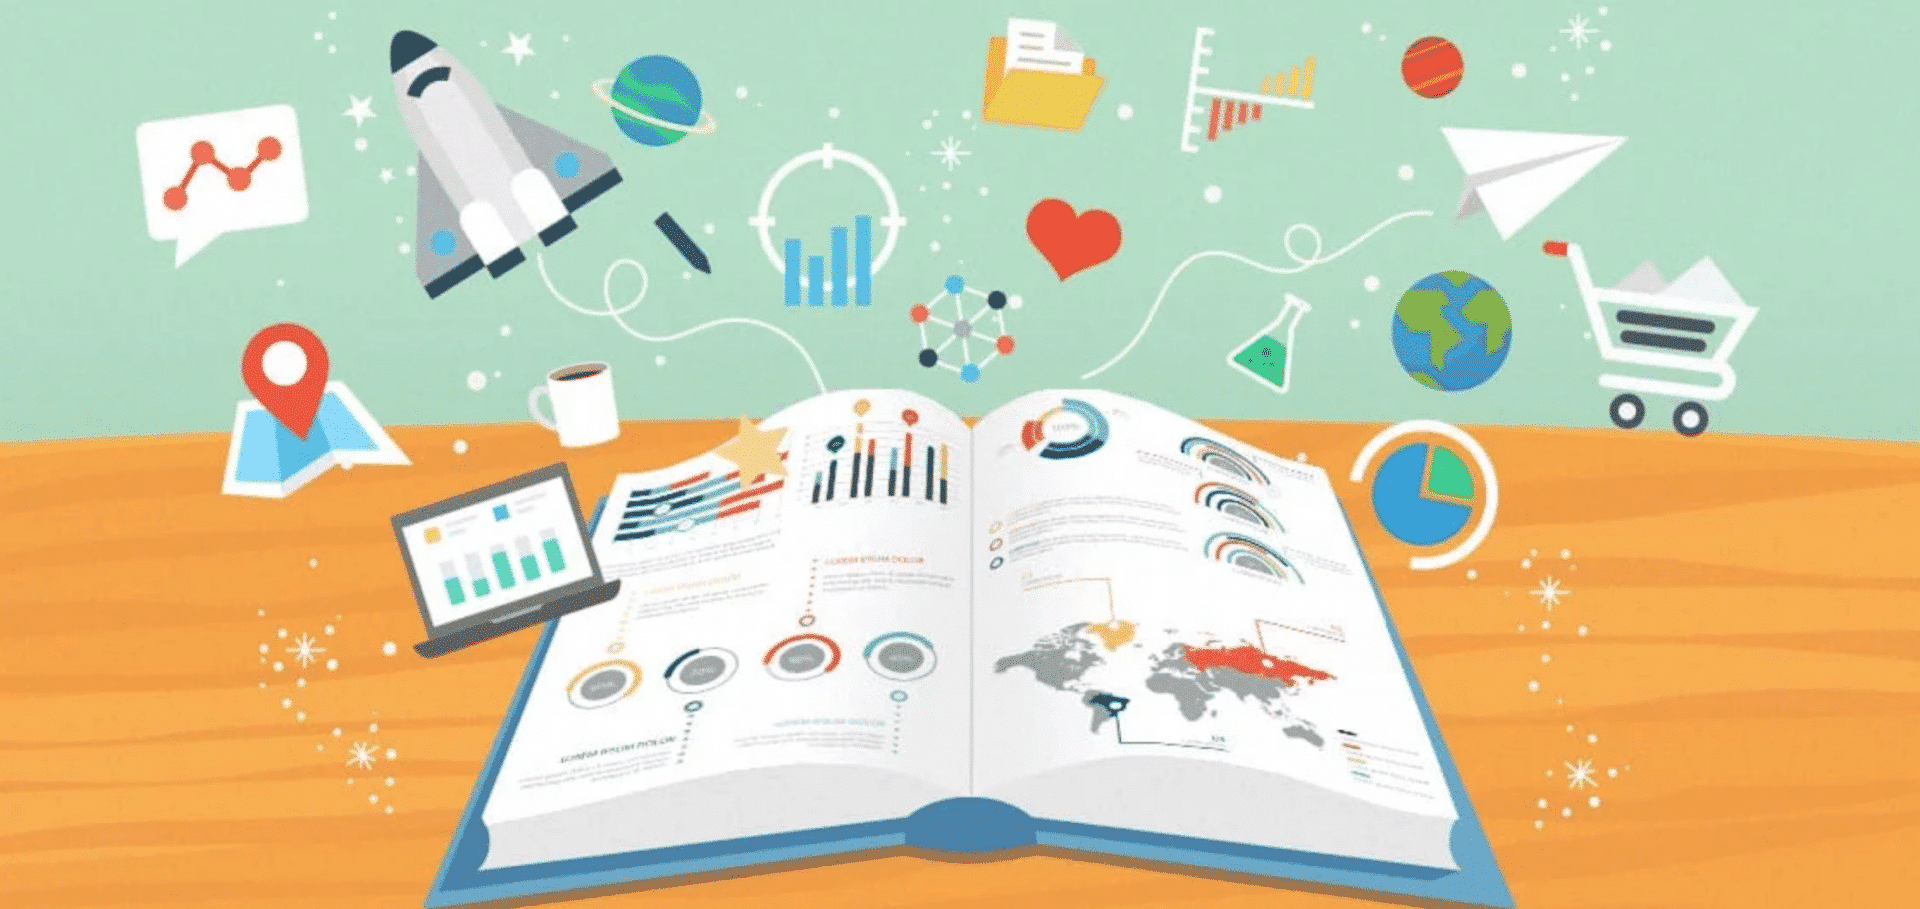 storytelling with data book